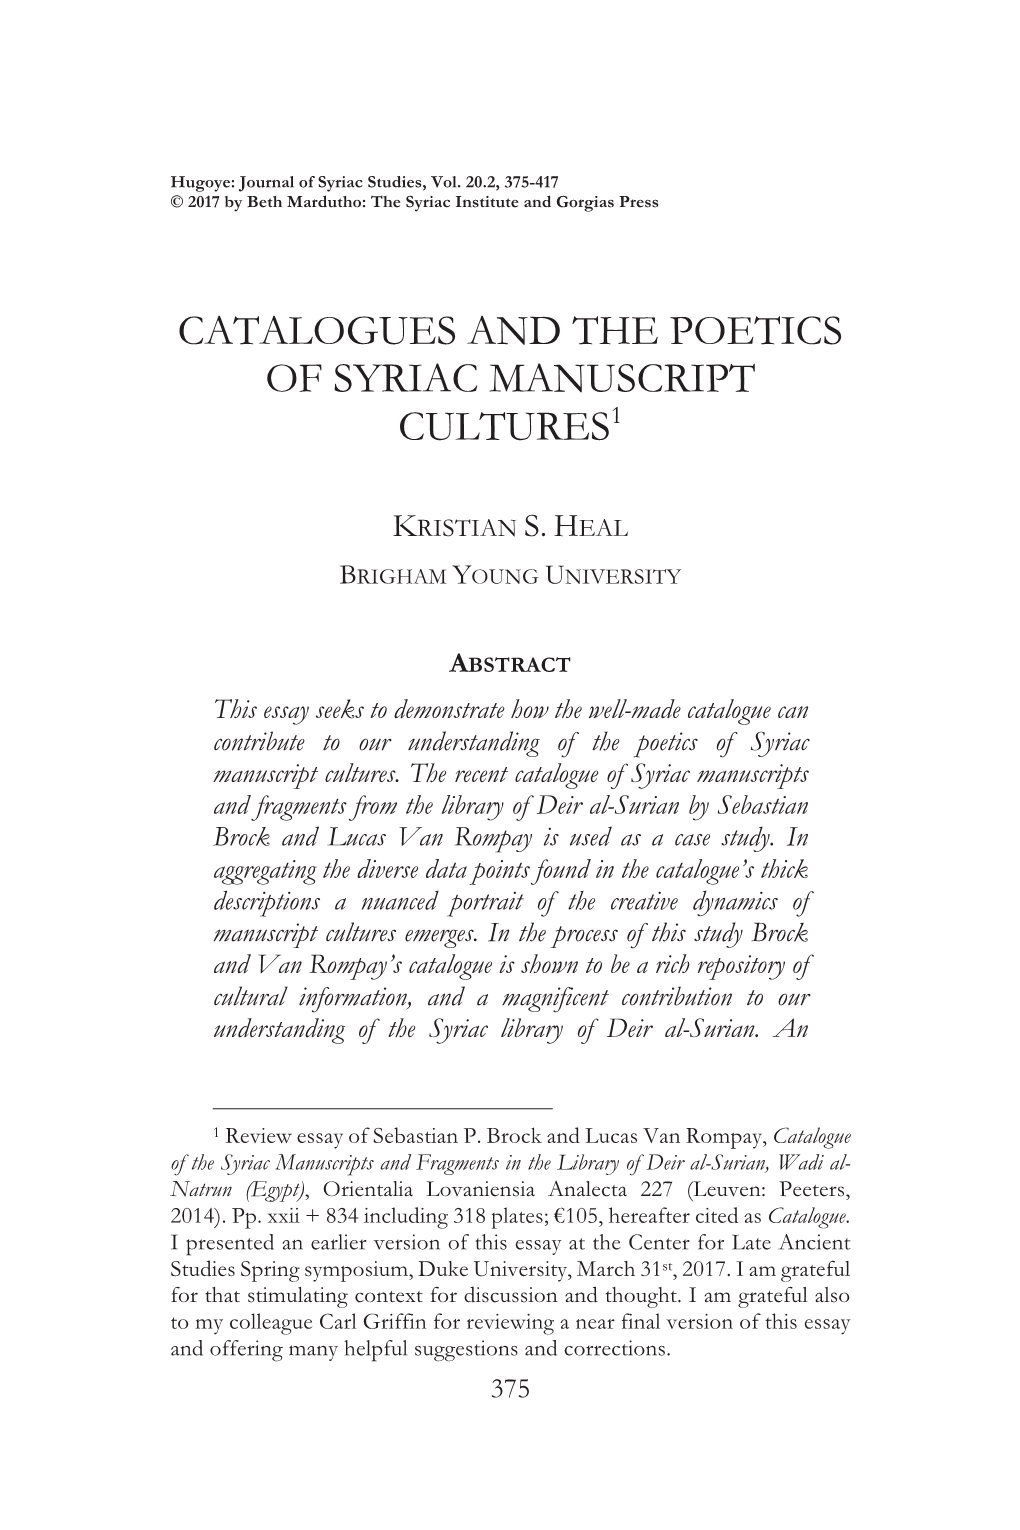 Catalogues and the Poetics of Syriac Manuscript Cultures1